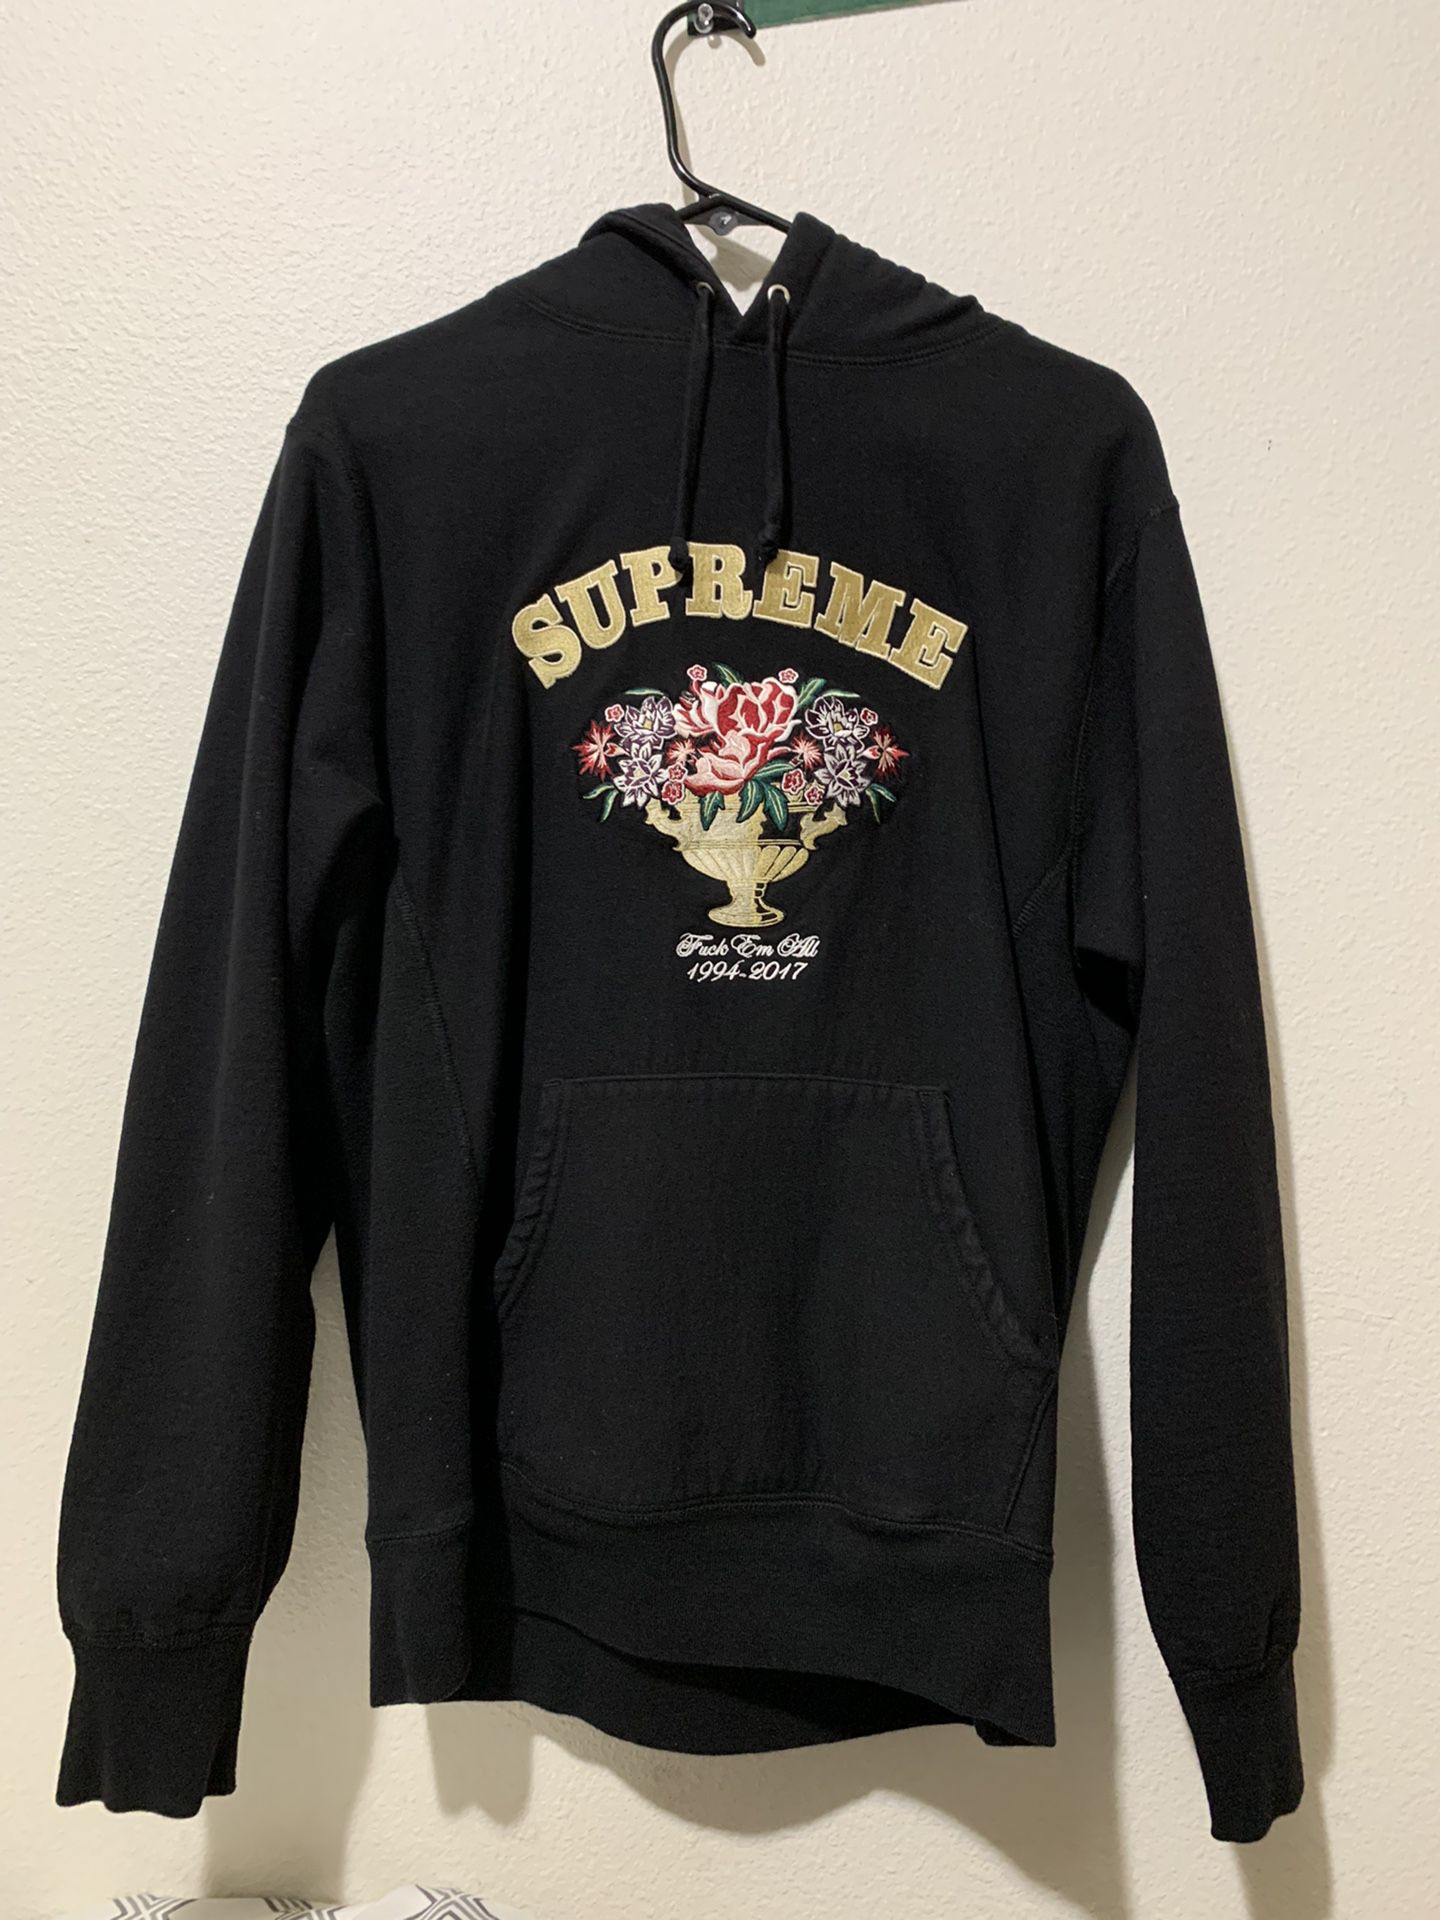 Supreme World Class Hoodie for Sale in Antioch, CA - OfferUp